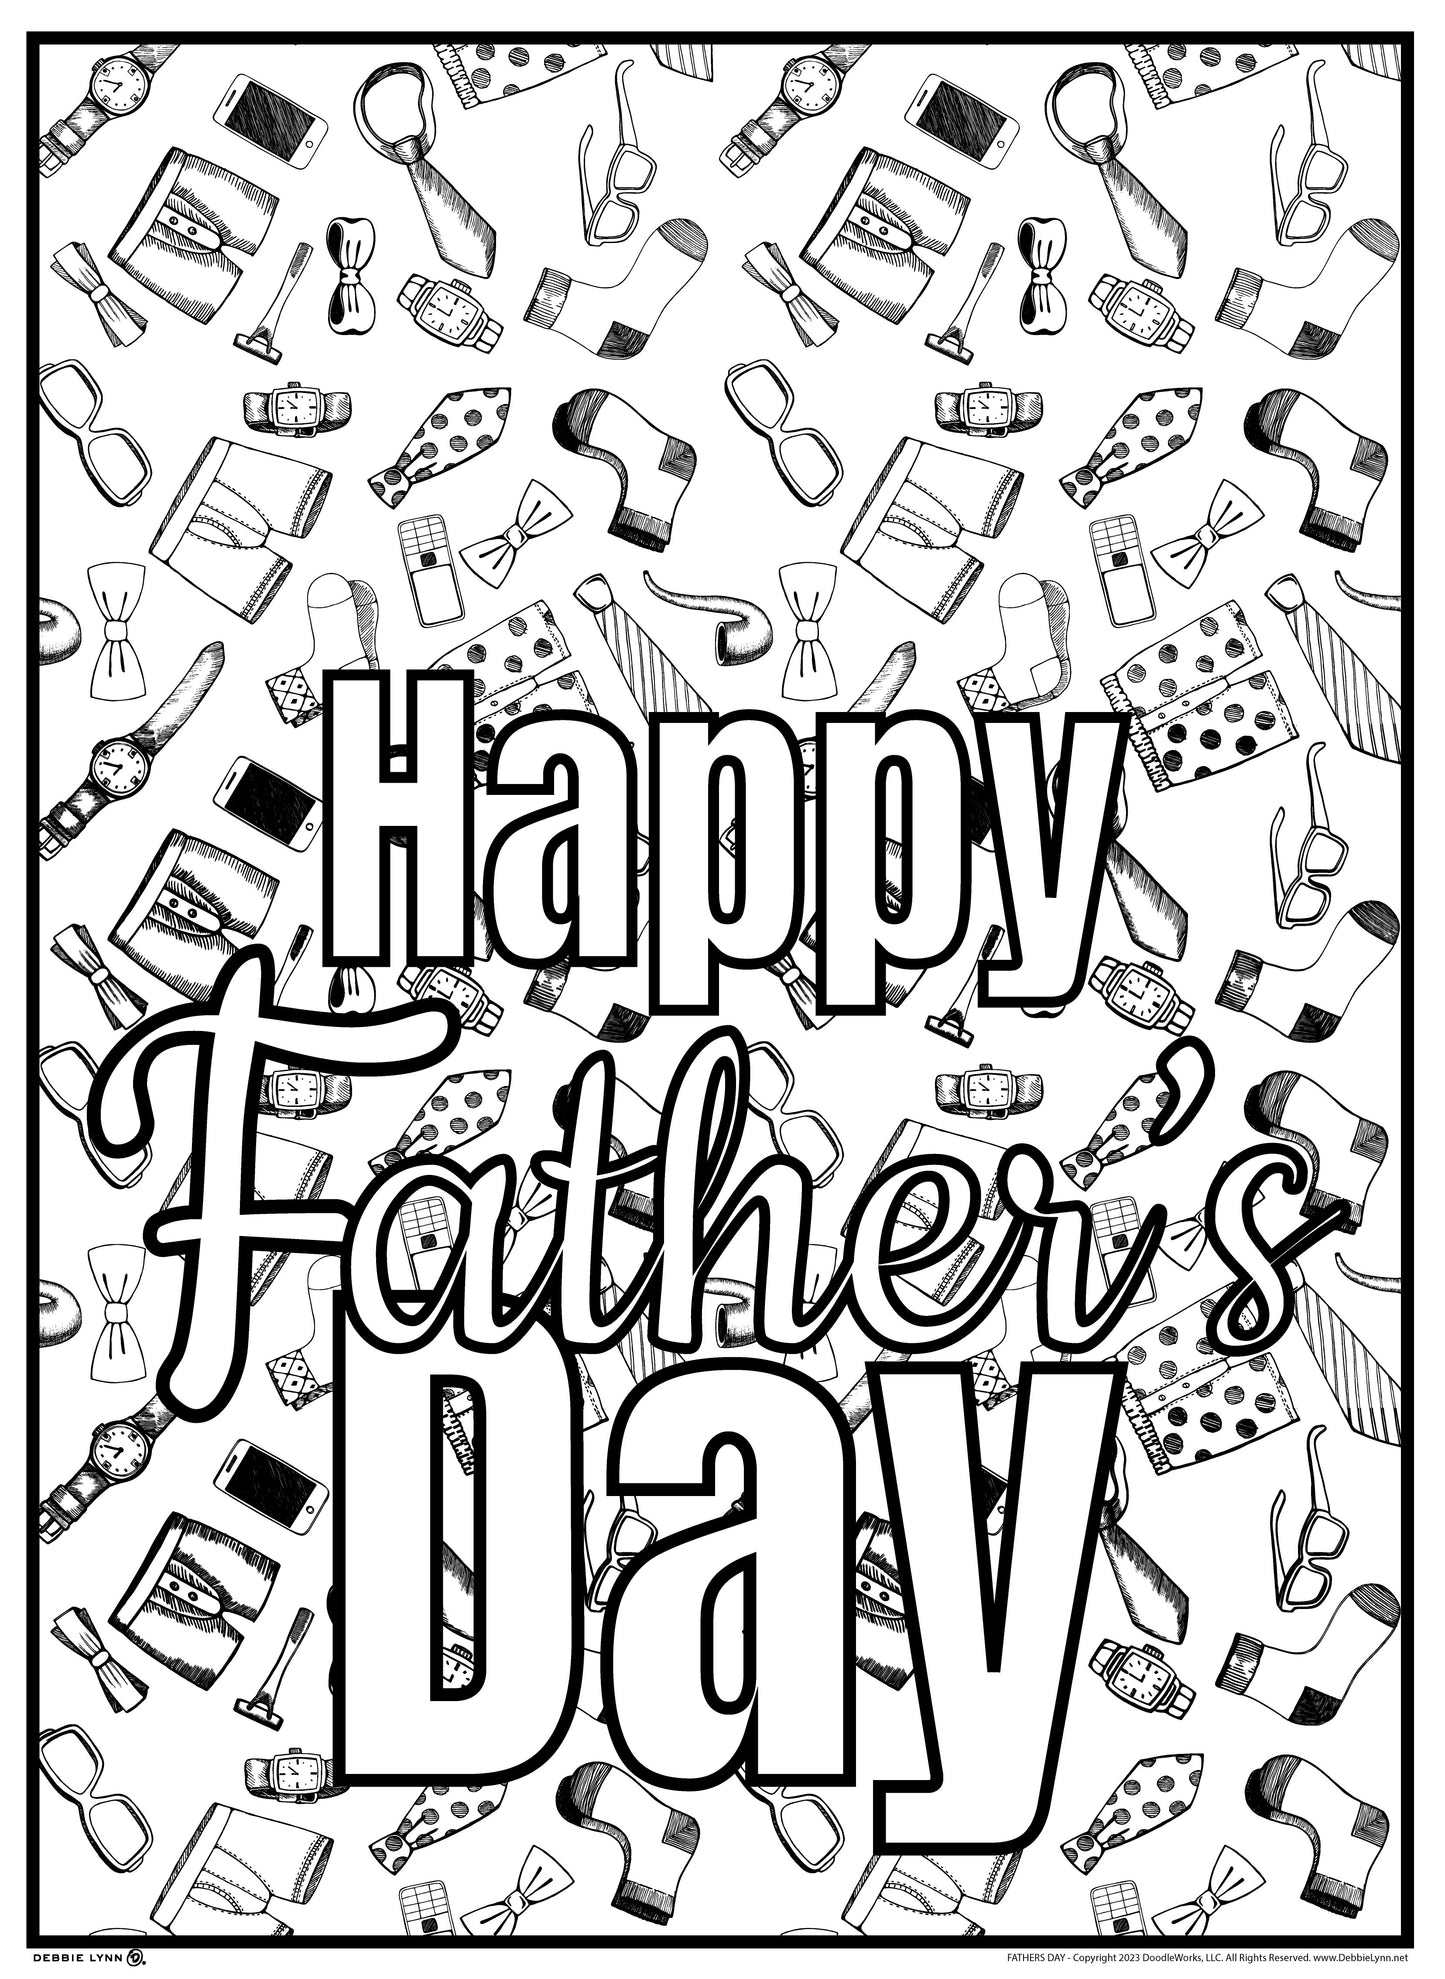 Fathers Day Personalized Giant Coloring Poster  46"x60"